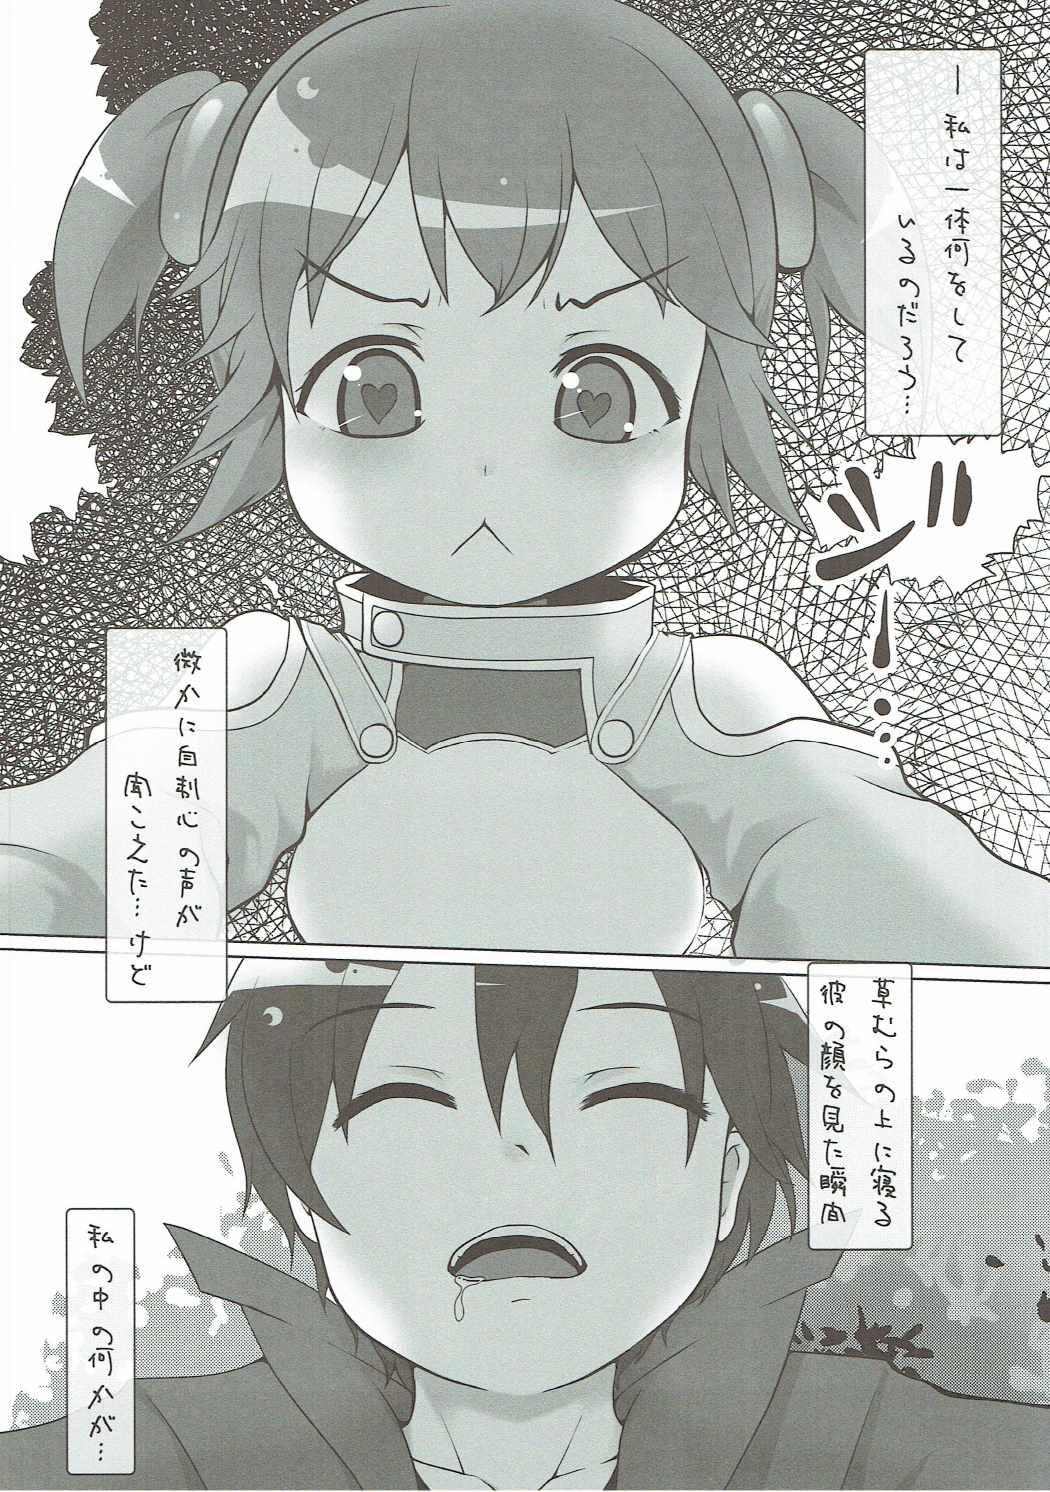 Solo SHIRIKA. - Sword art online Hogtied - Page 2